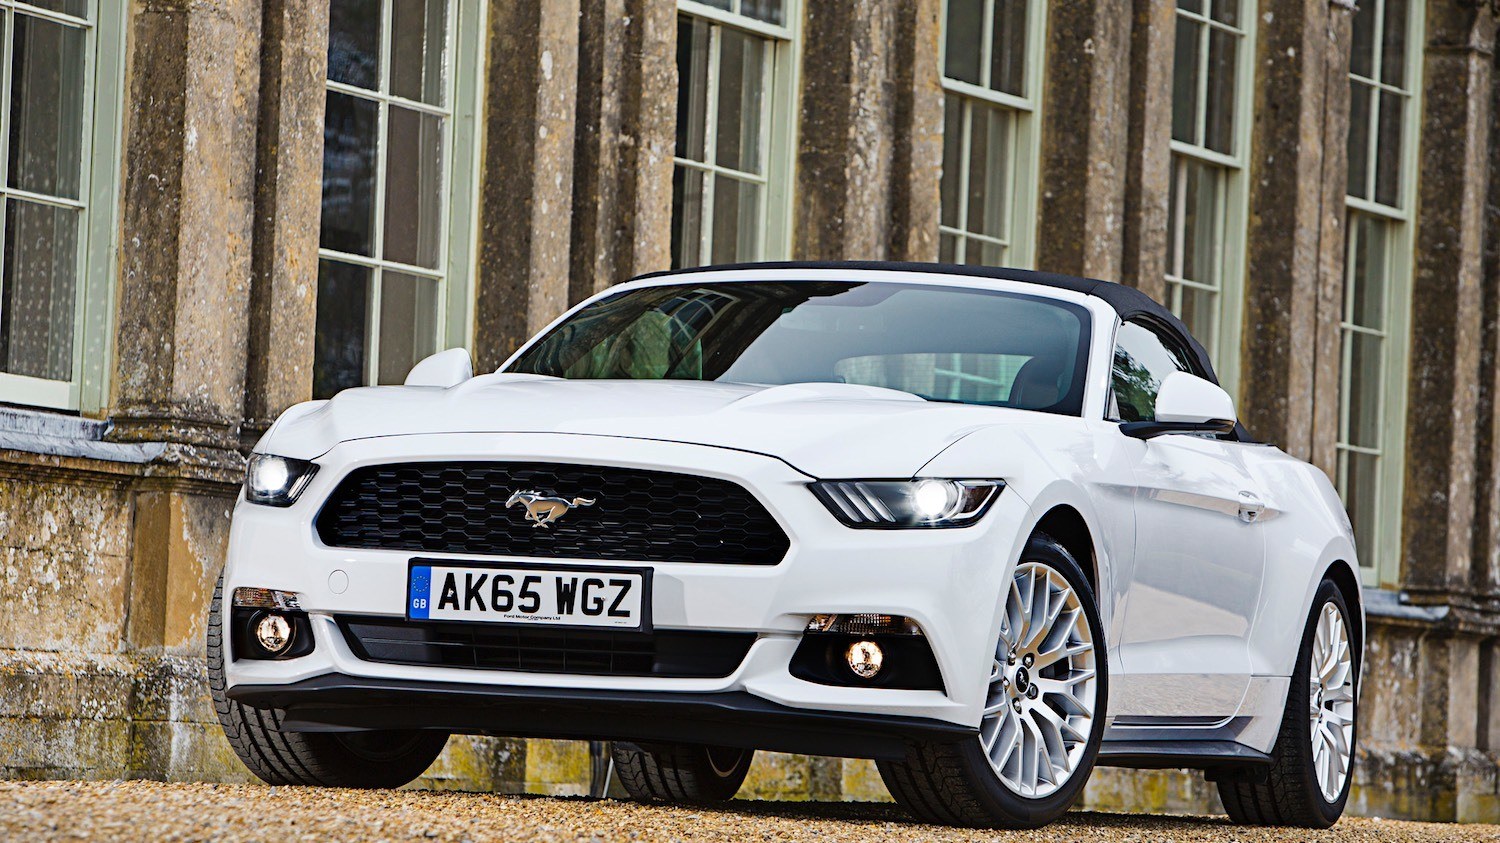 Ford Mustang reviewed by Tom Scanlan for Drive 4